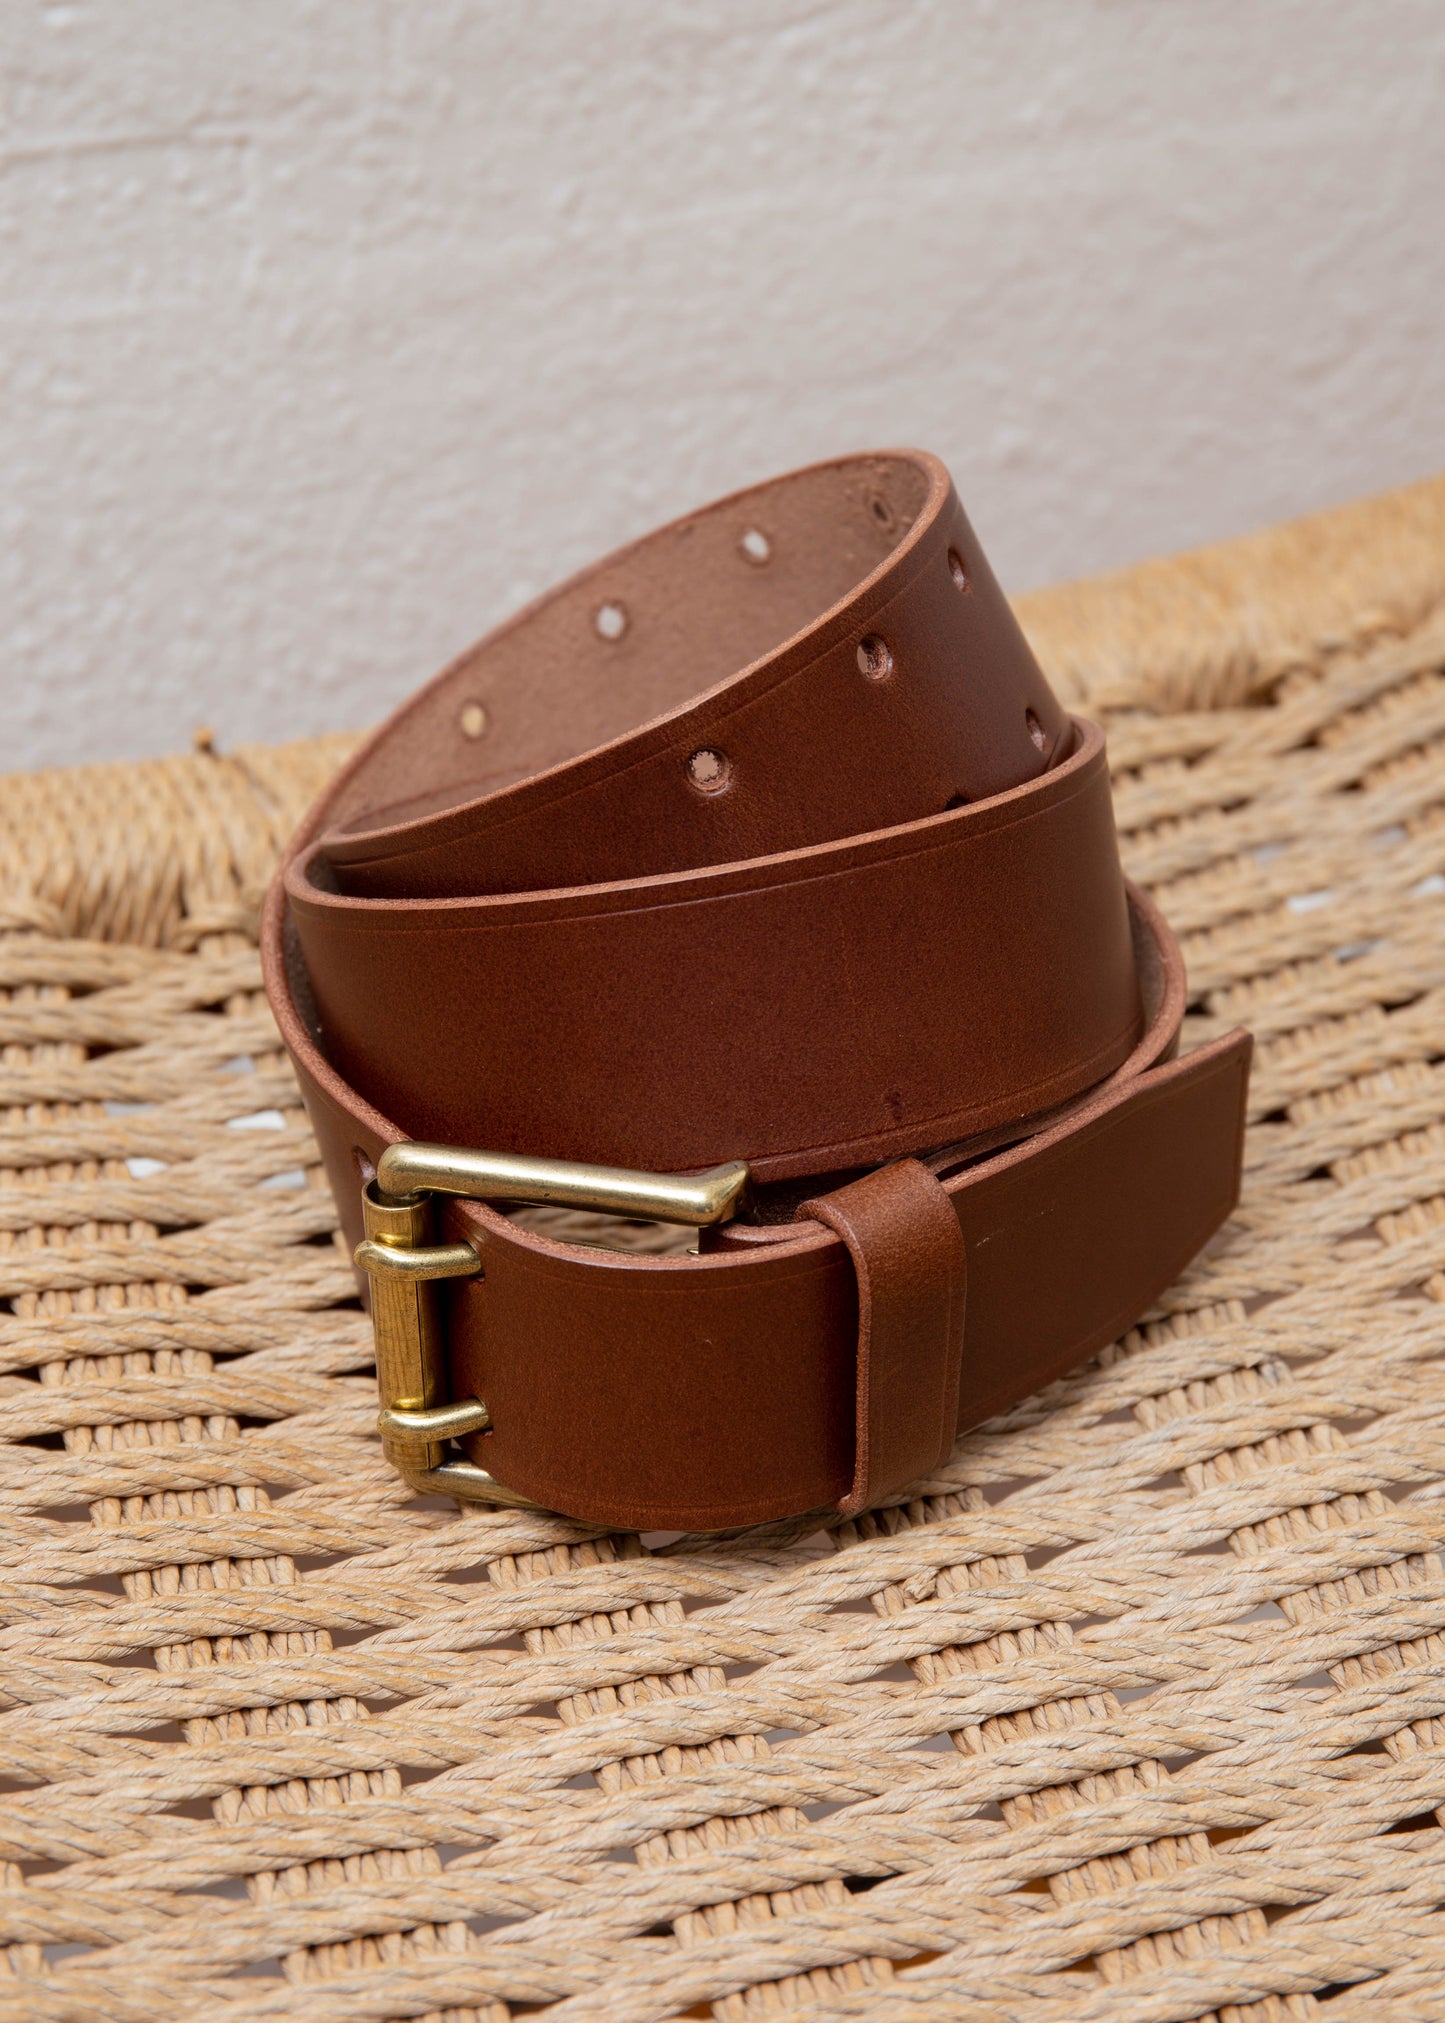 Close up of cow leather belt in color dark brown folded